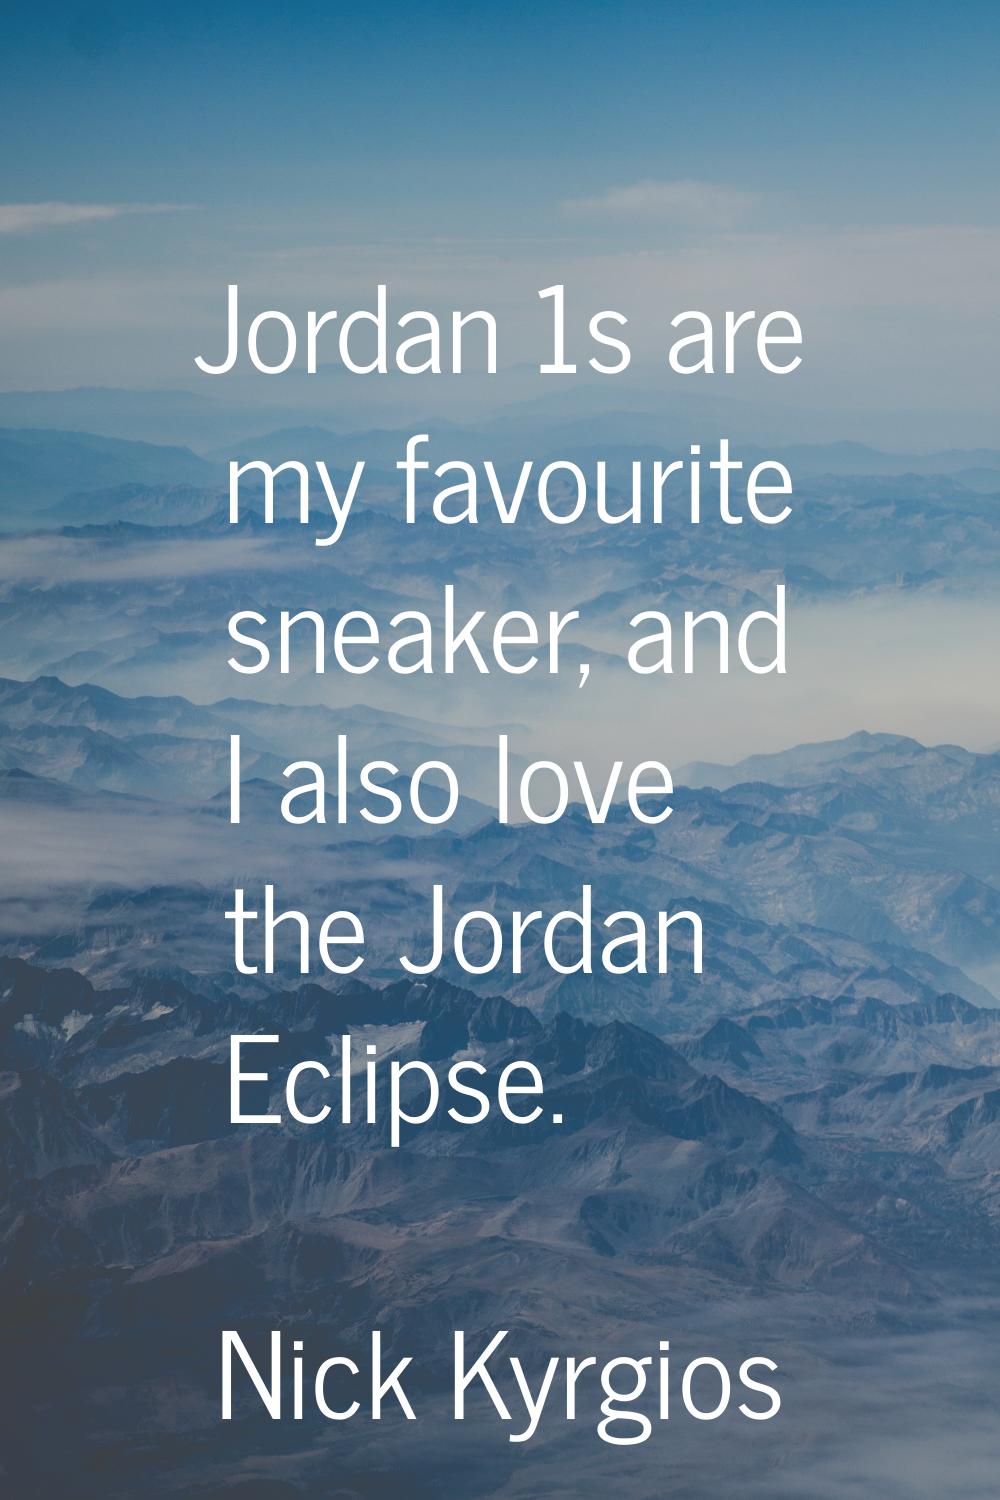 Jordan 1s are my favourite sneaker, and I also love the Jordan Eclipse.